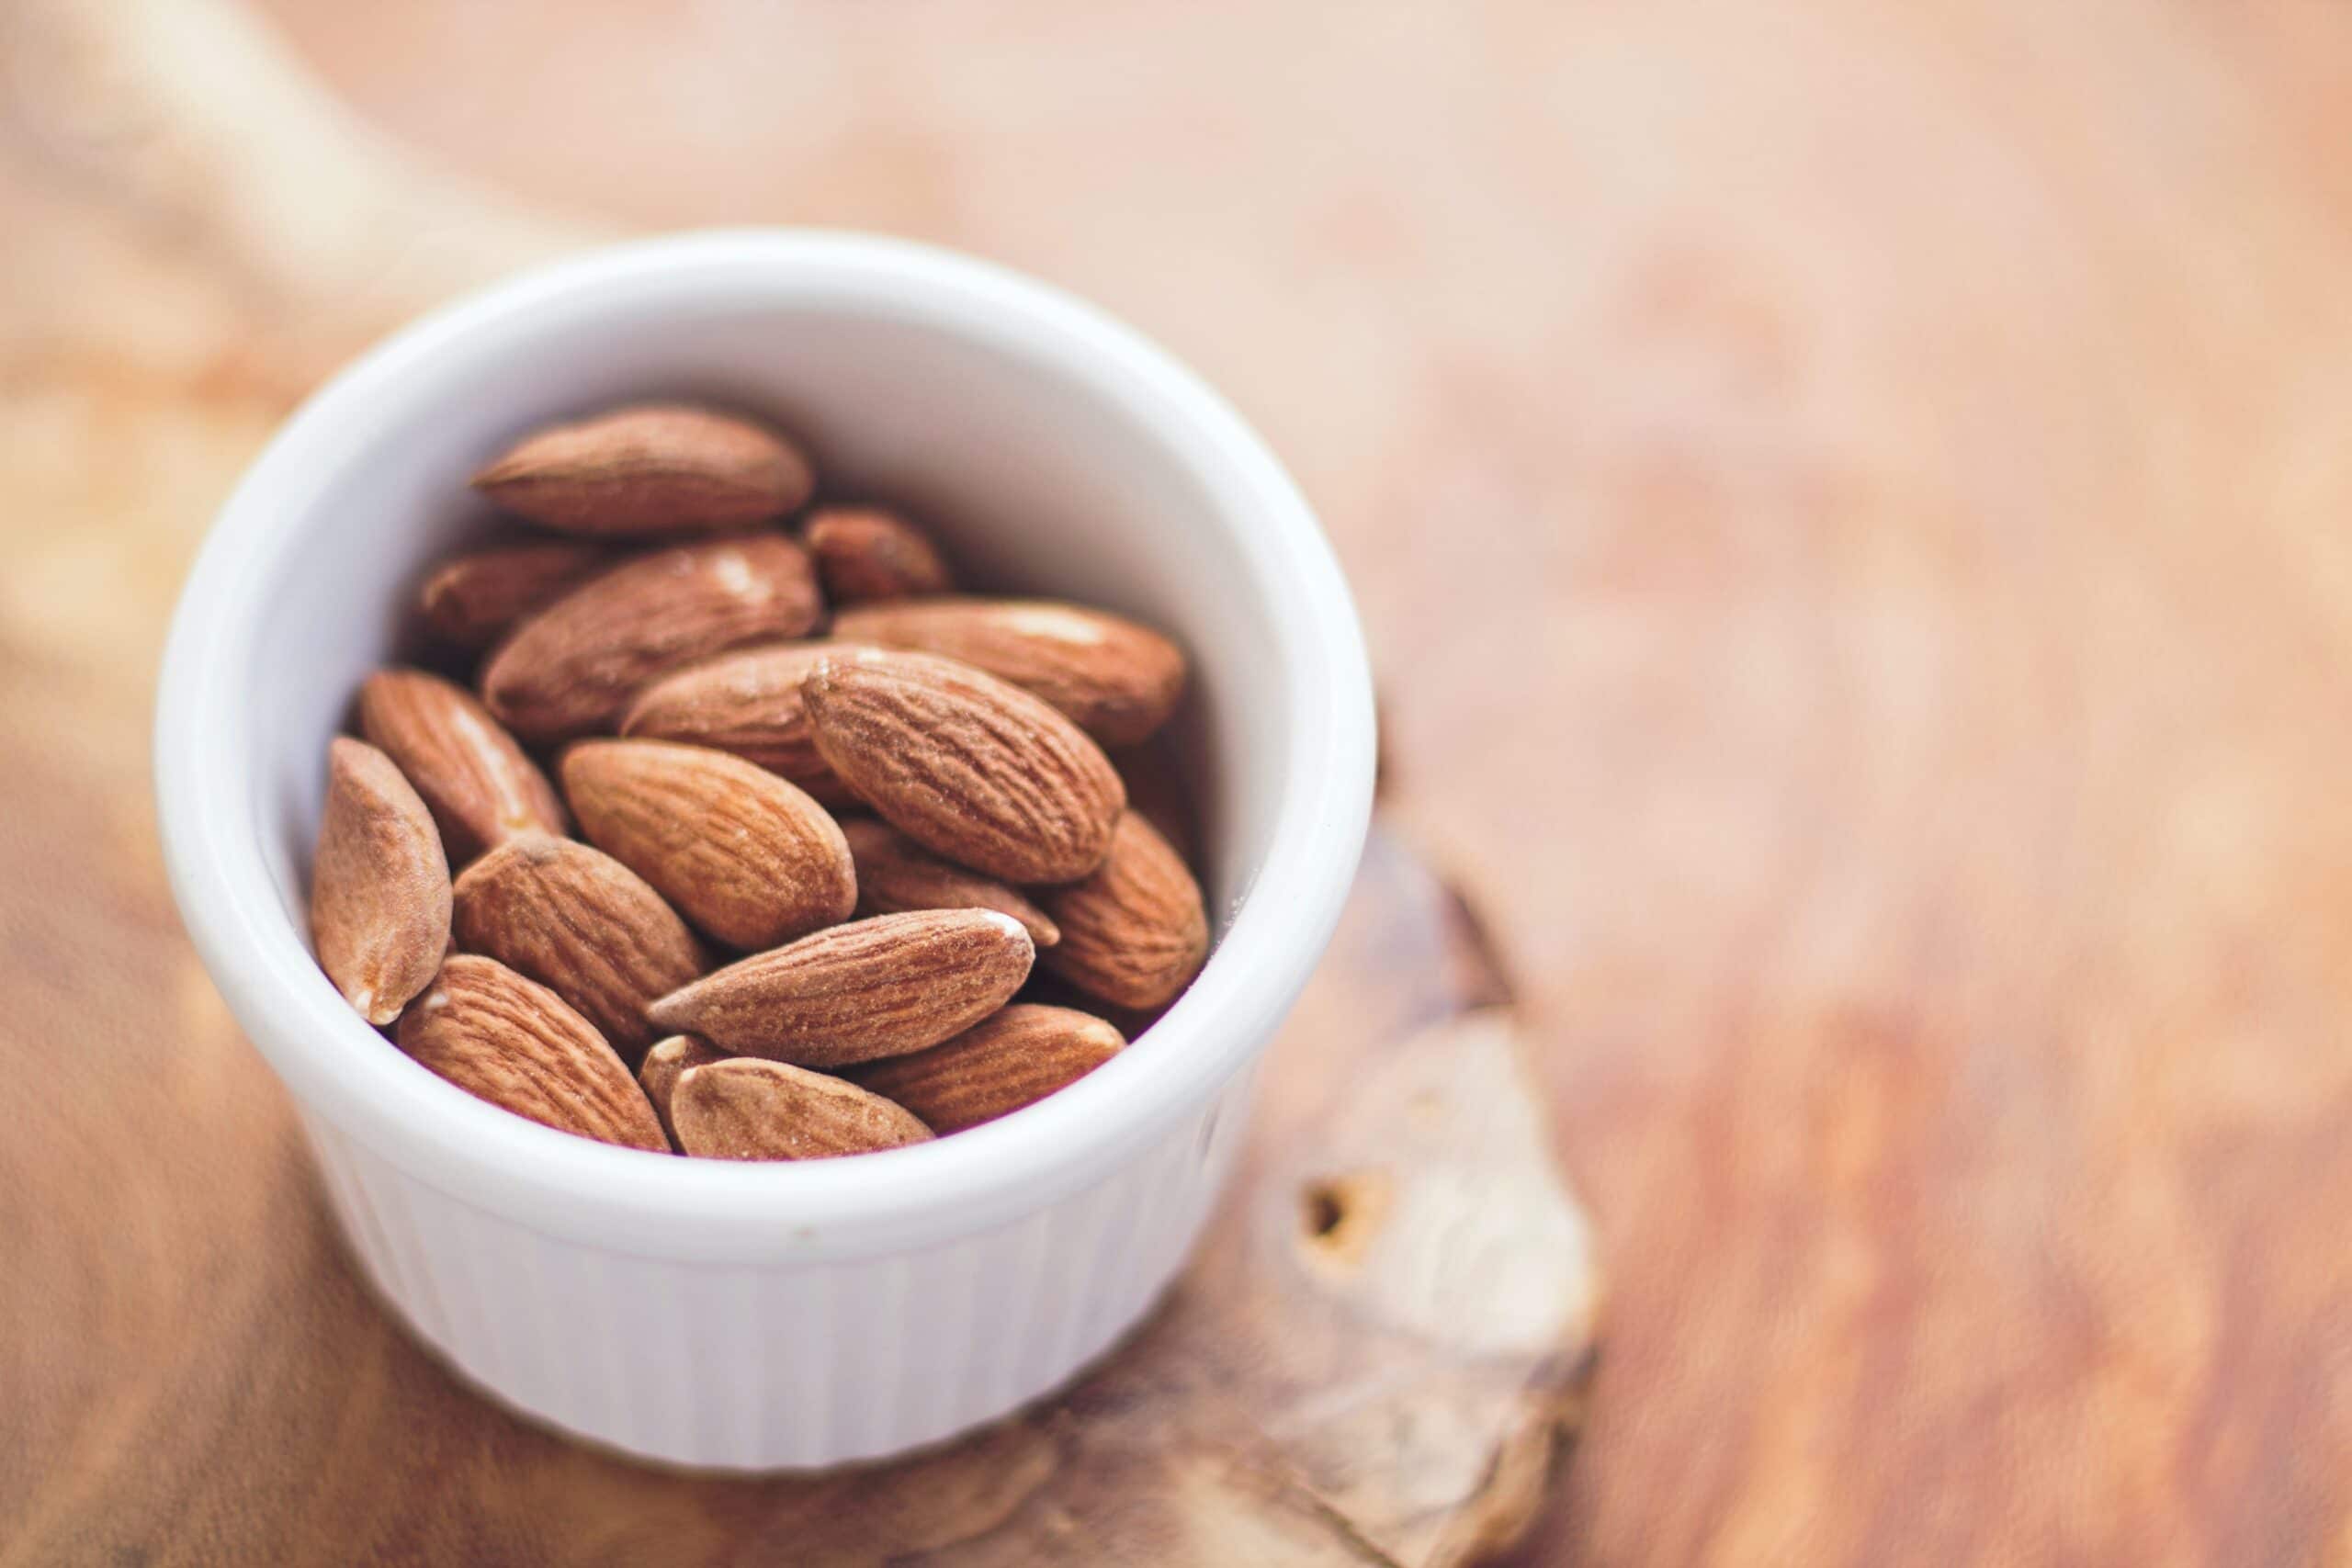 Almonds, a very common food intolerance